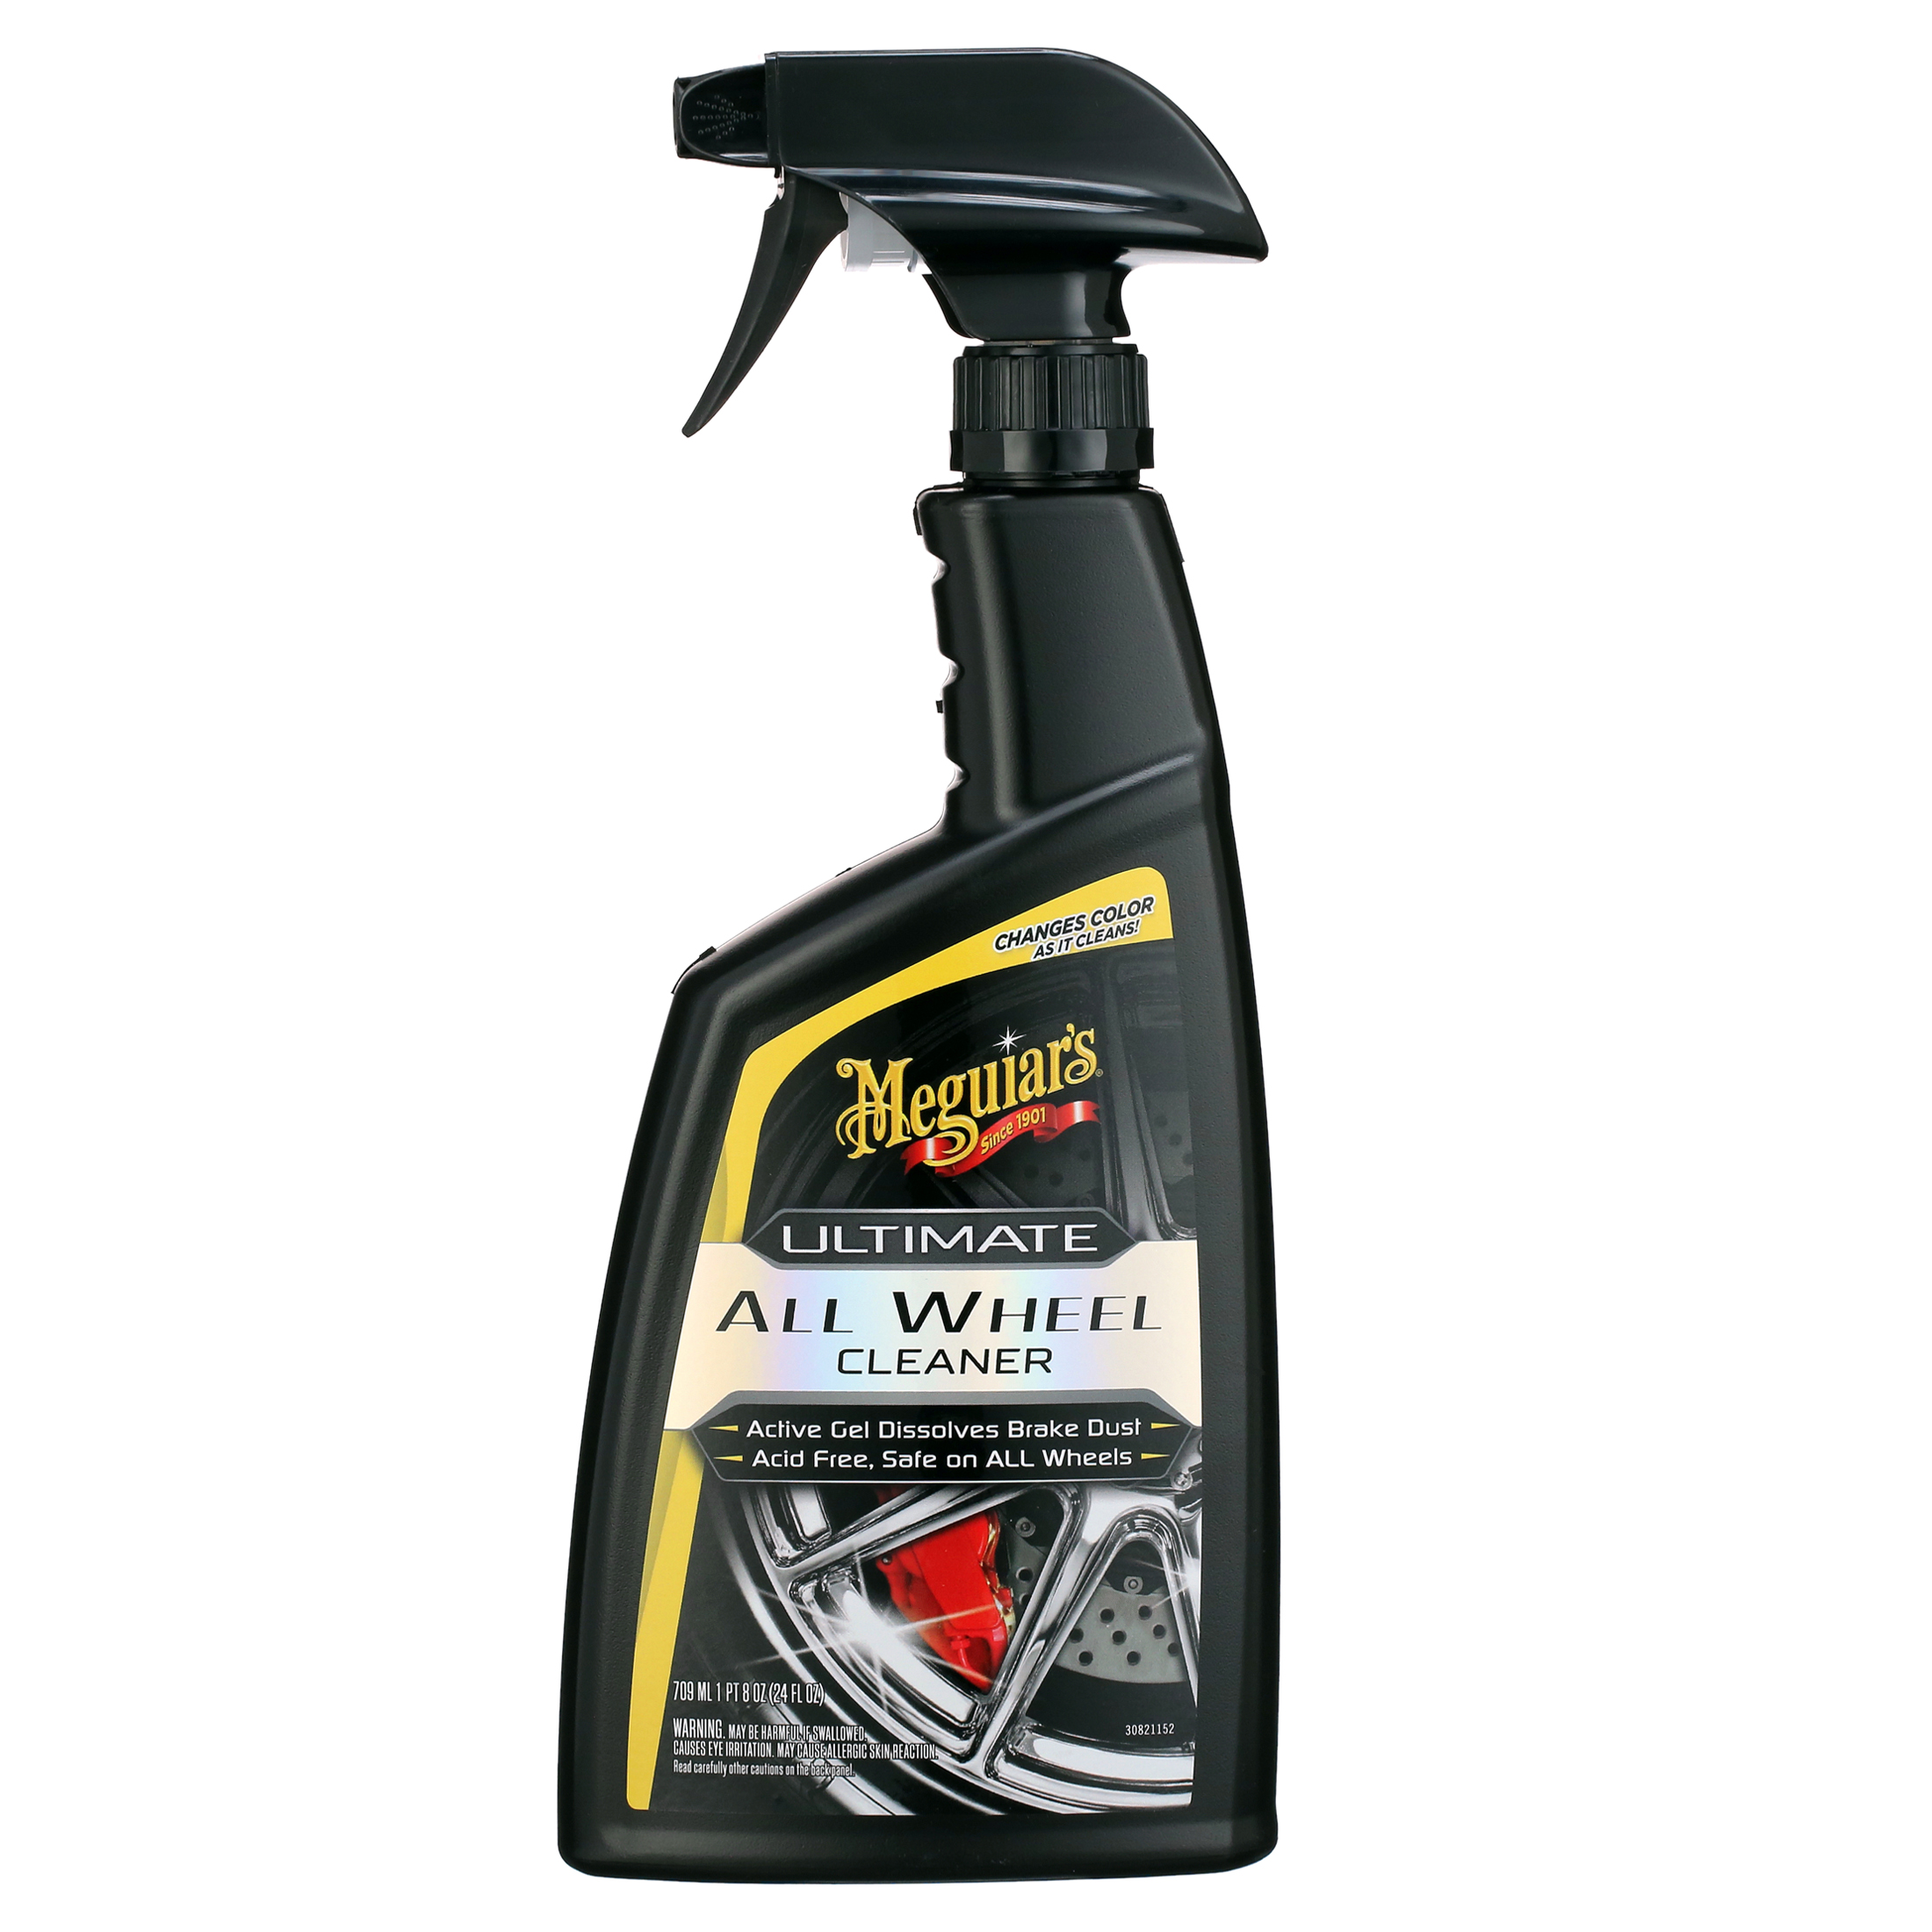 Meguiar's Ultimate All Wheel Cleaner, G180124, 24 oz, Spray - image 1 of 10